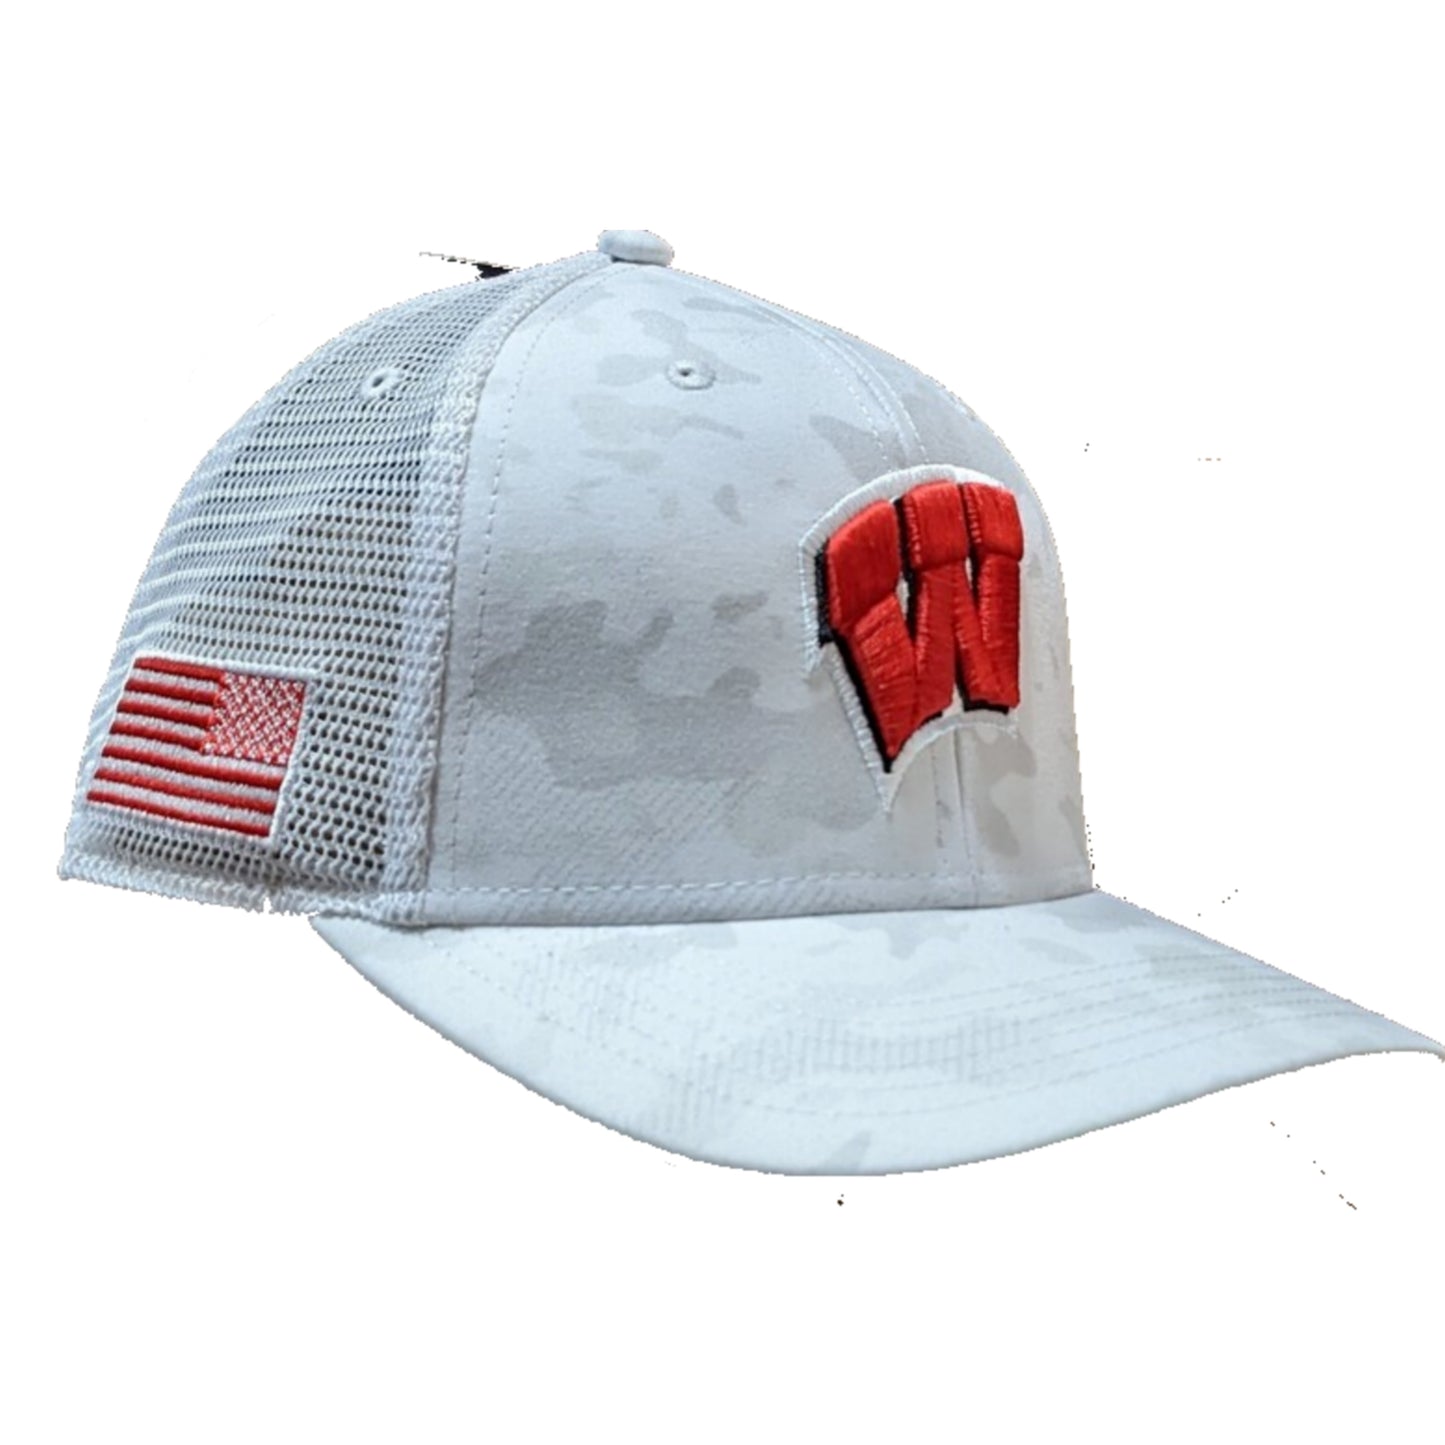 Wisconsin Badgers Operation Hat Trick Military White Trucker Adjustable Top of the World Hat